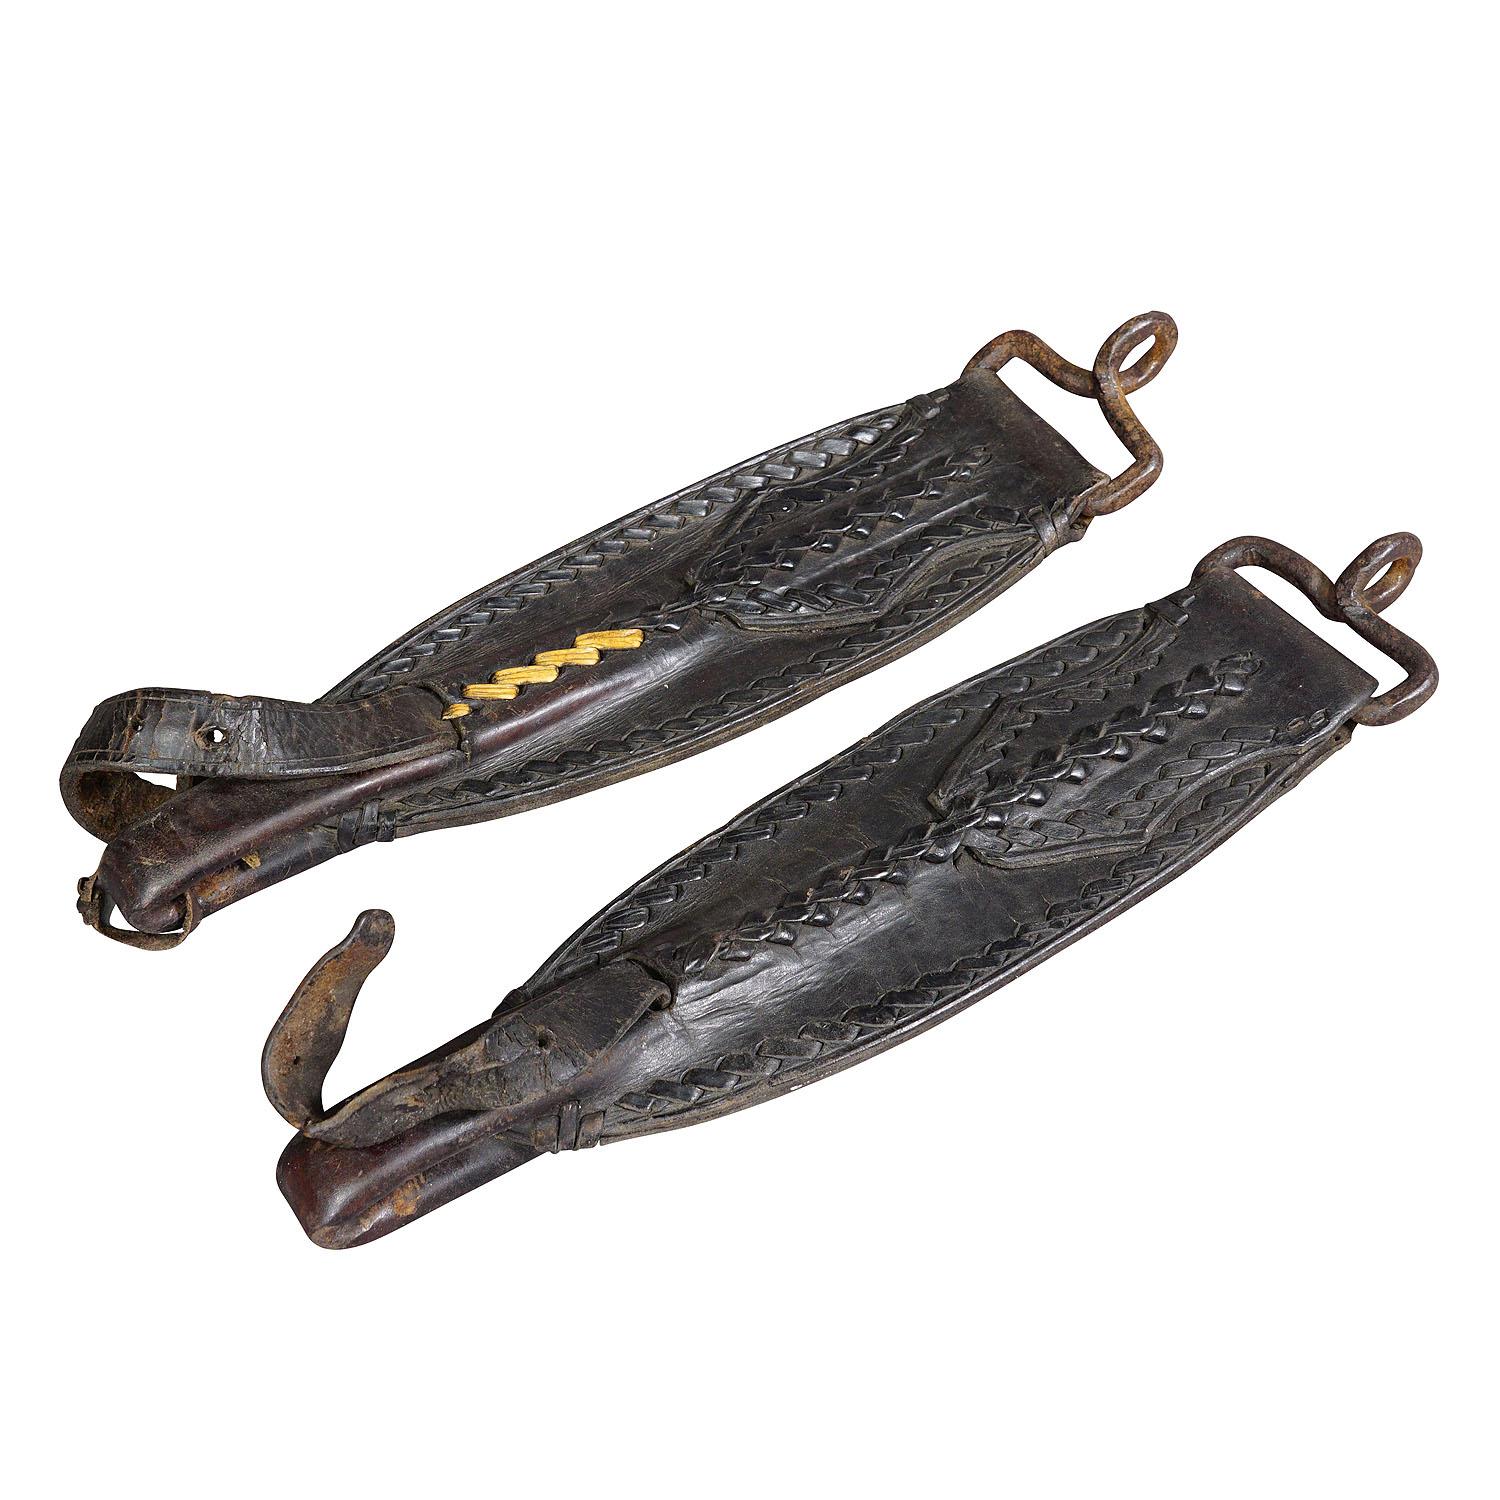 A Pair Antique Leather Stirrup Holders

A pair antique leather stirrup holders. Handmade in the first half of the 20th century. Good condition with traces of use, one with old repair. This authentic antique piece is a great home decoration and